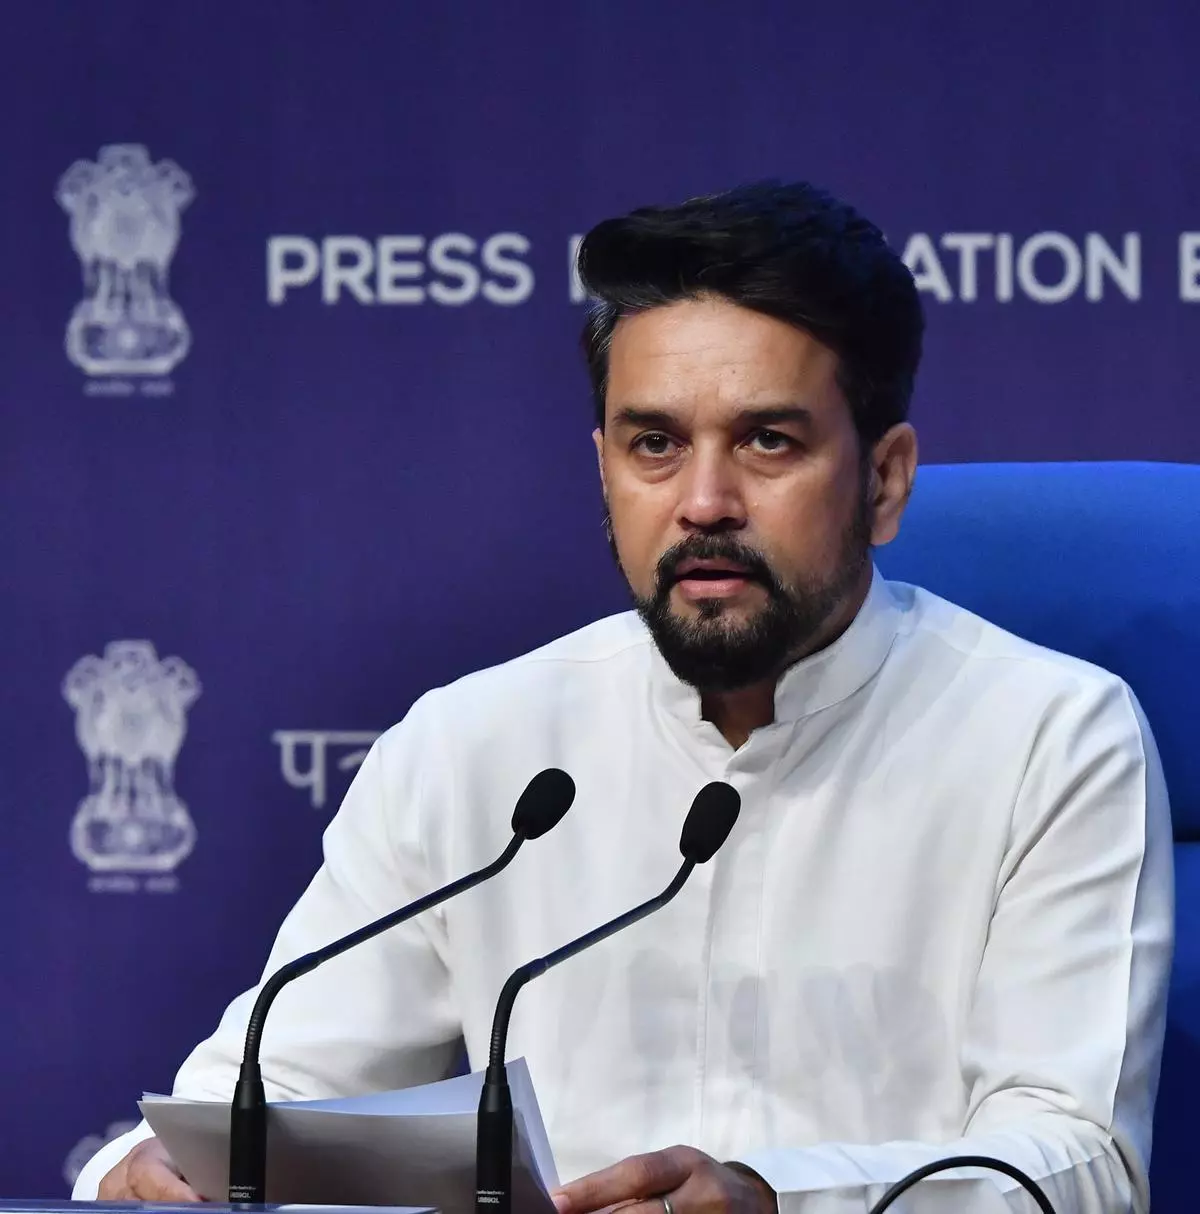 Information & Broadcasting Minister Anurag Thakur addressing a press conference on Cabinet decisions in New Delhi, on Wednesday